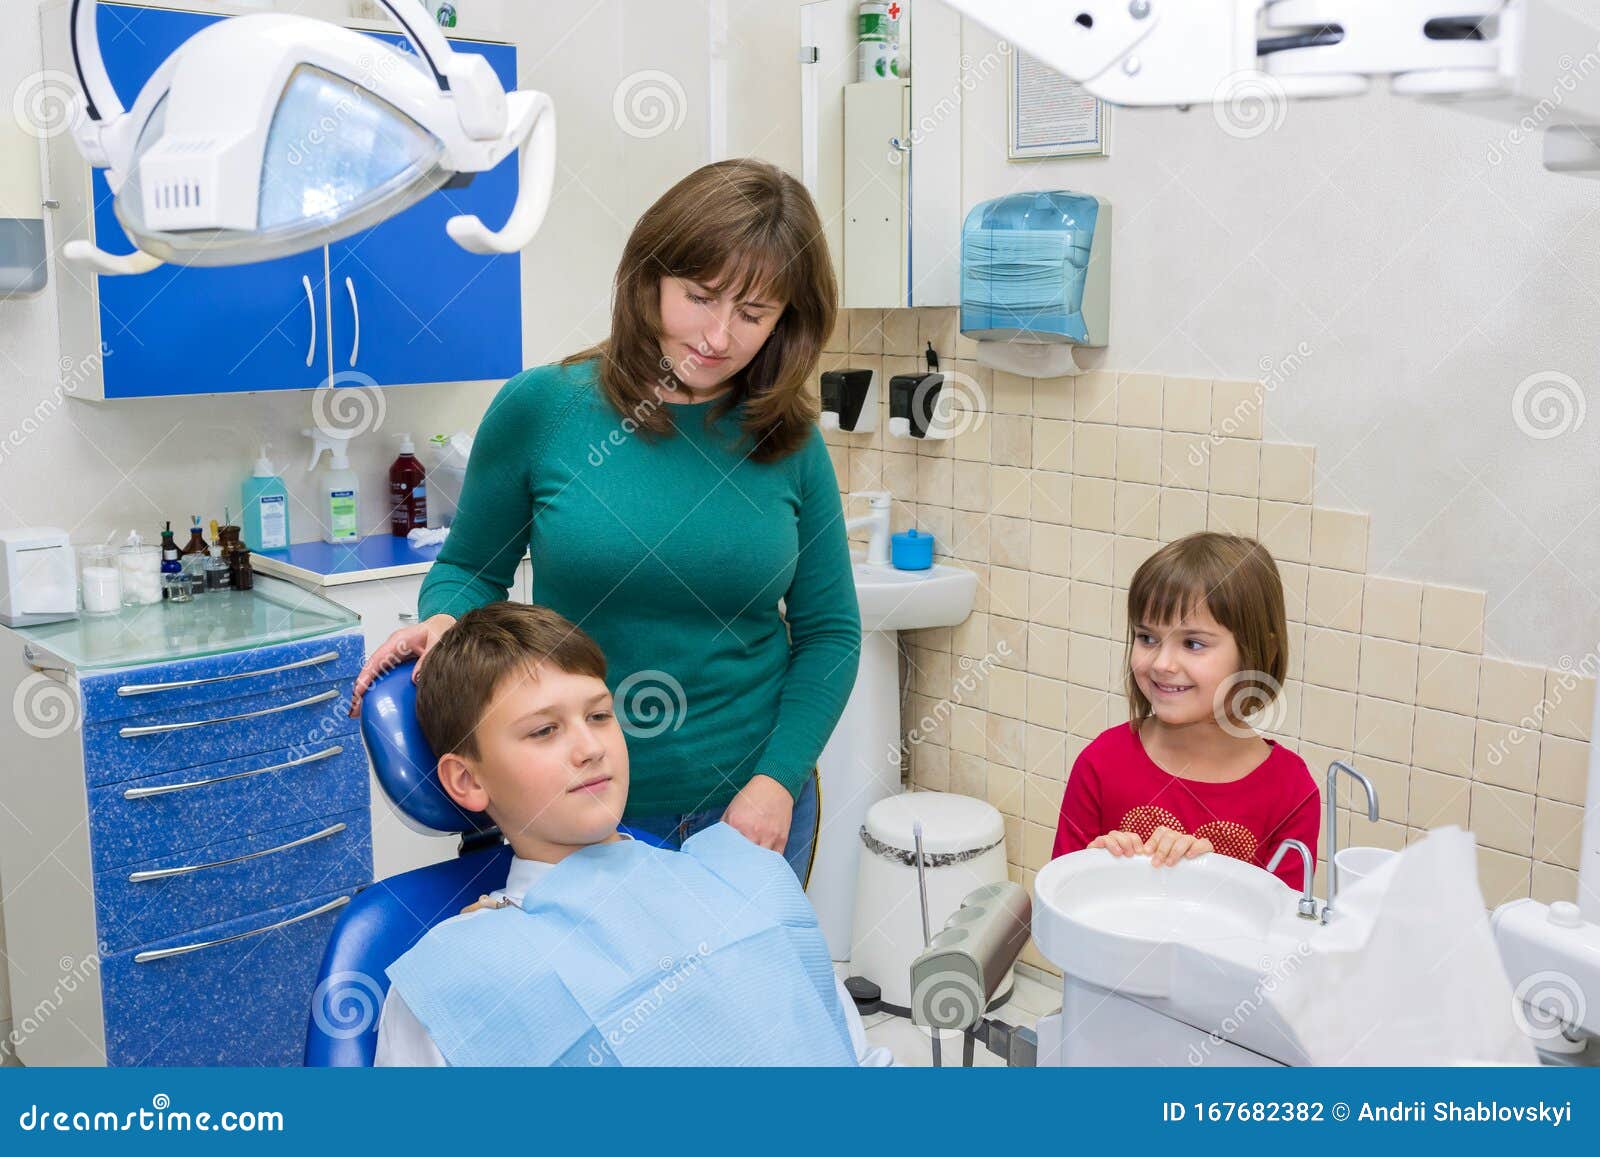 a boy with his family at the dentistÃ¢â¬â¢s in the clinic